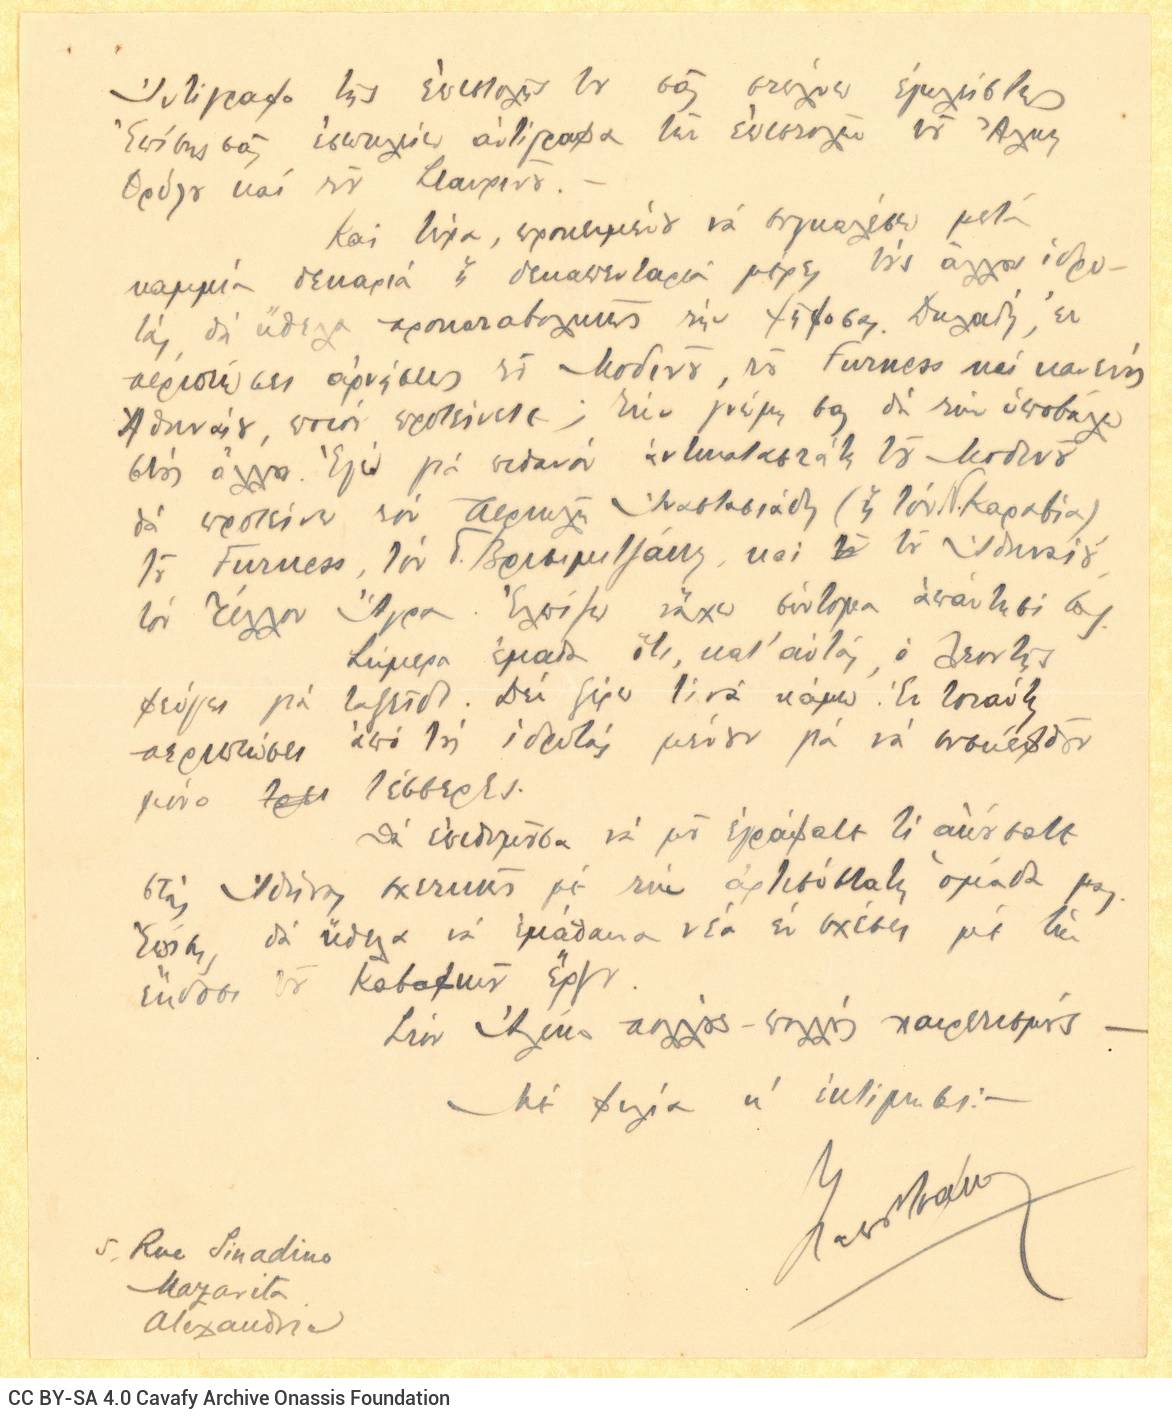 Handwritten letter by G. A. Papoutsakis to Rica Singopoulo on one side of two sheets. The other sides are blank. The sender i